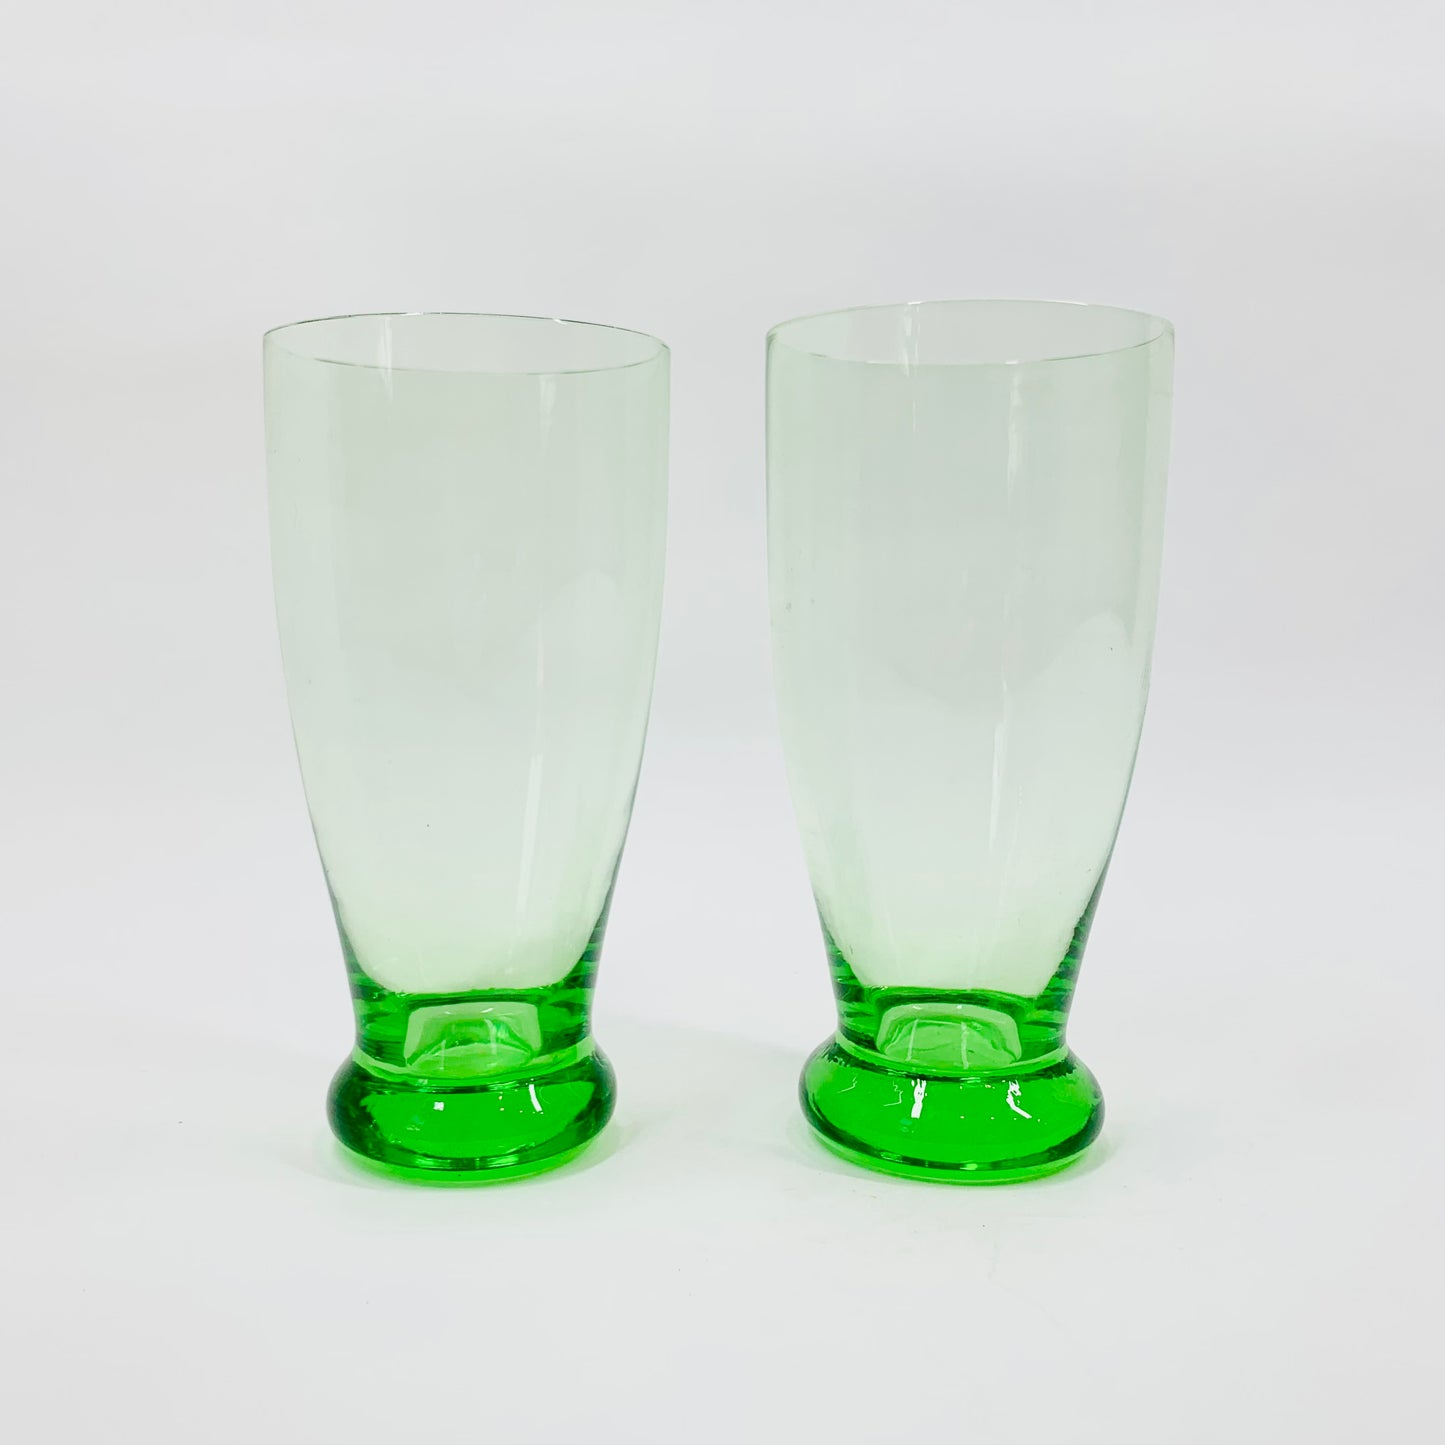 Antique green Depression glass water highball glasses